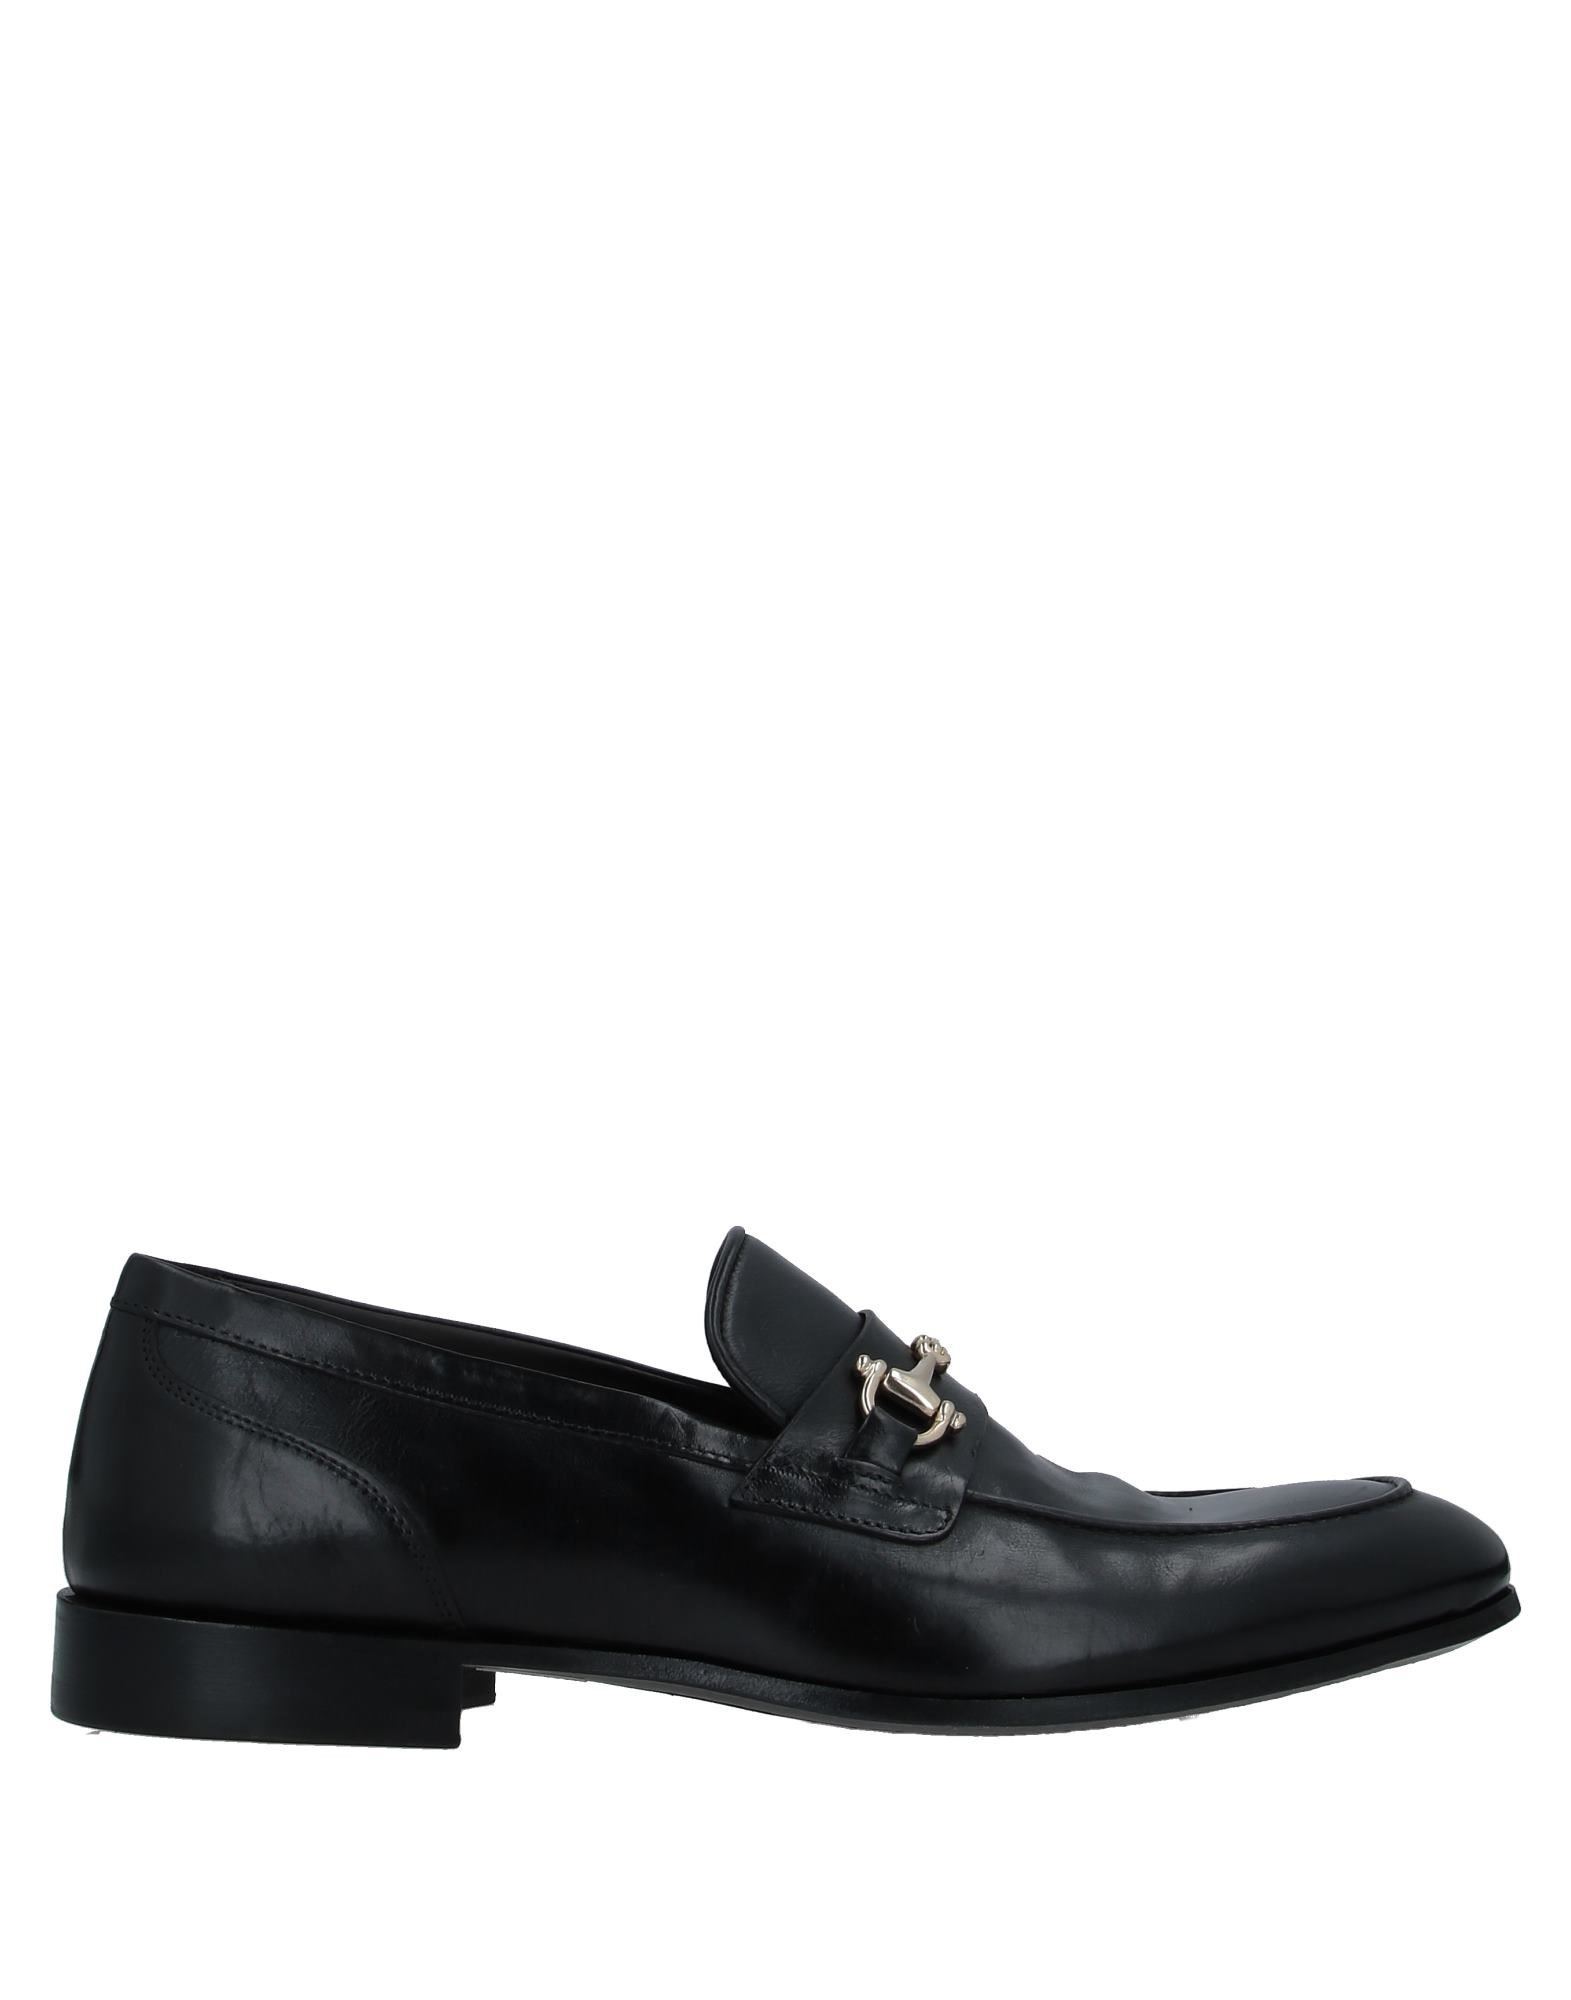 CARVANI Loafers